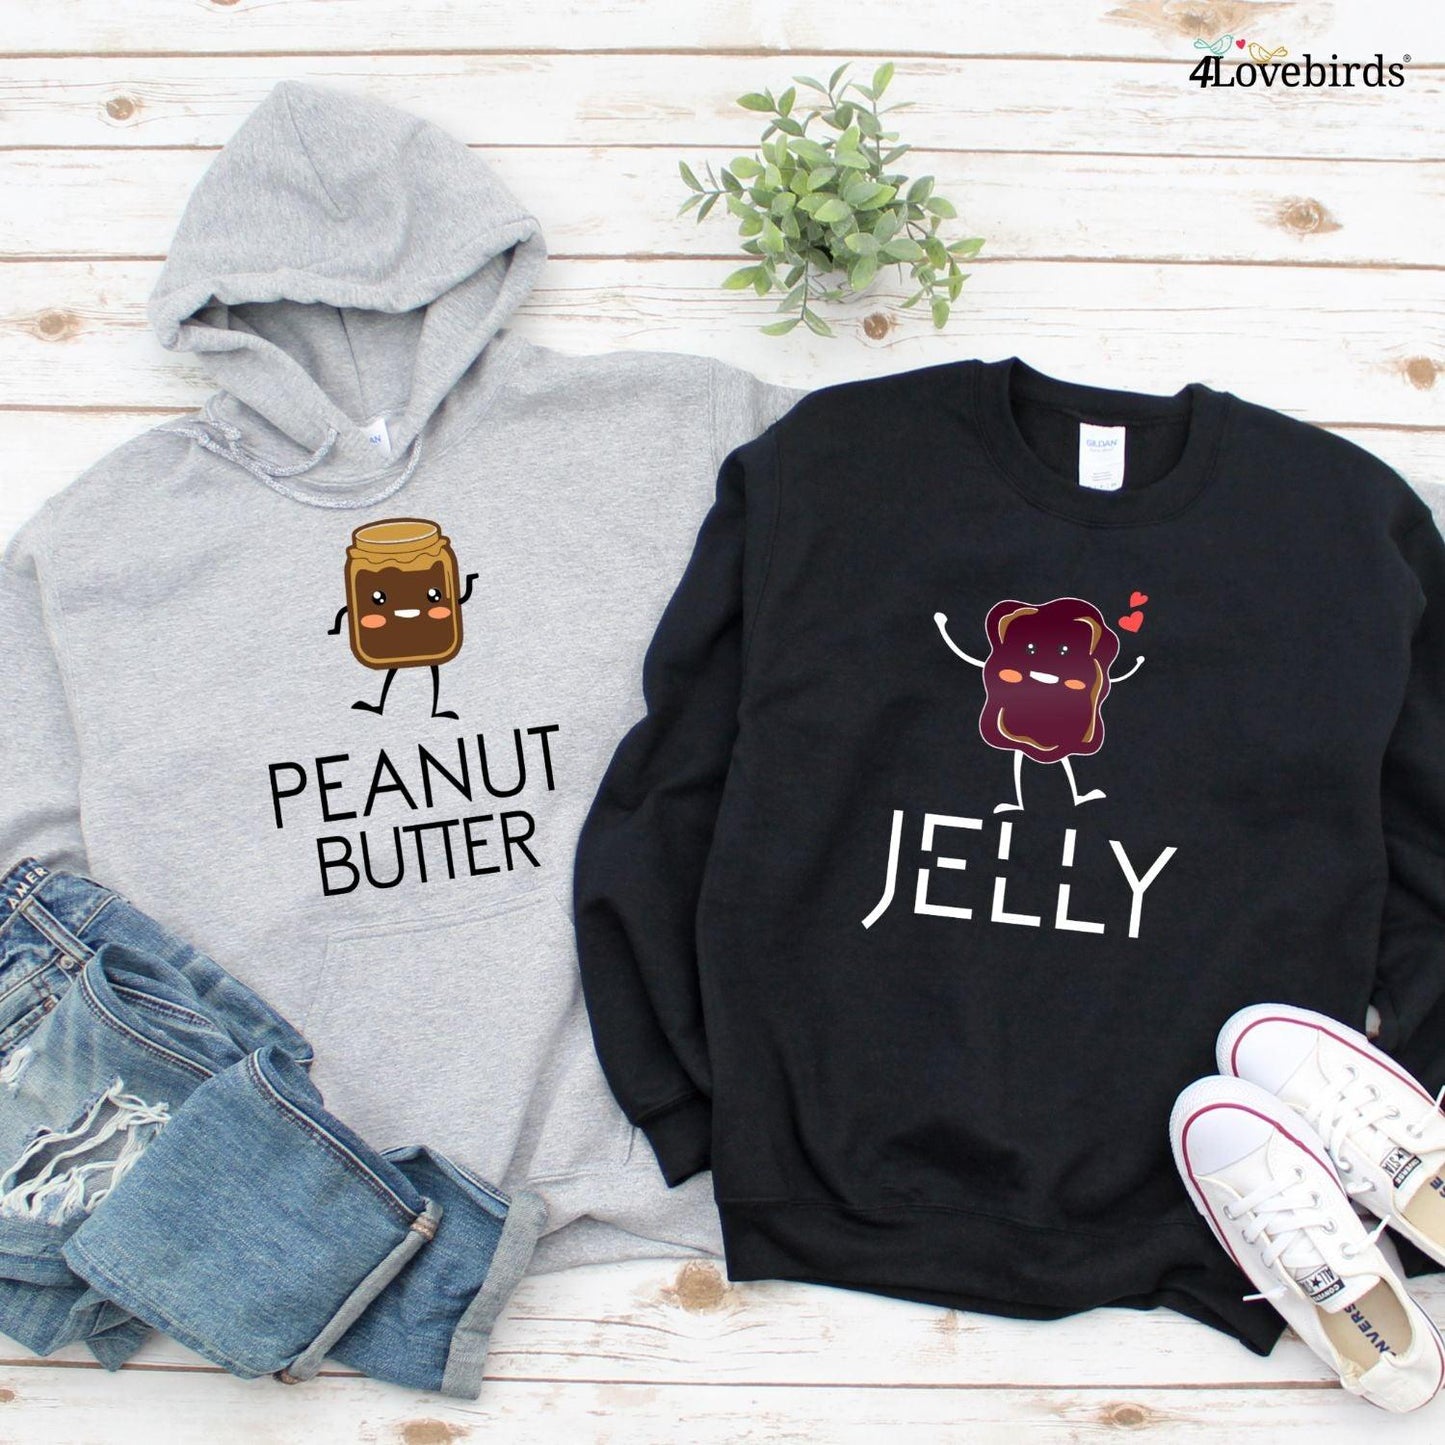 Peanut Butter & Jelly Matching Set: Perfect for Couples! - 4Lovebirds